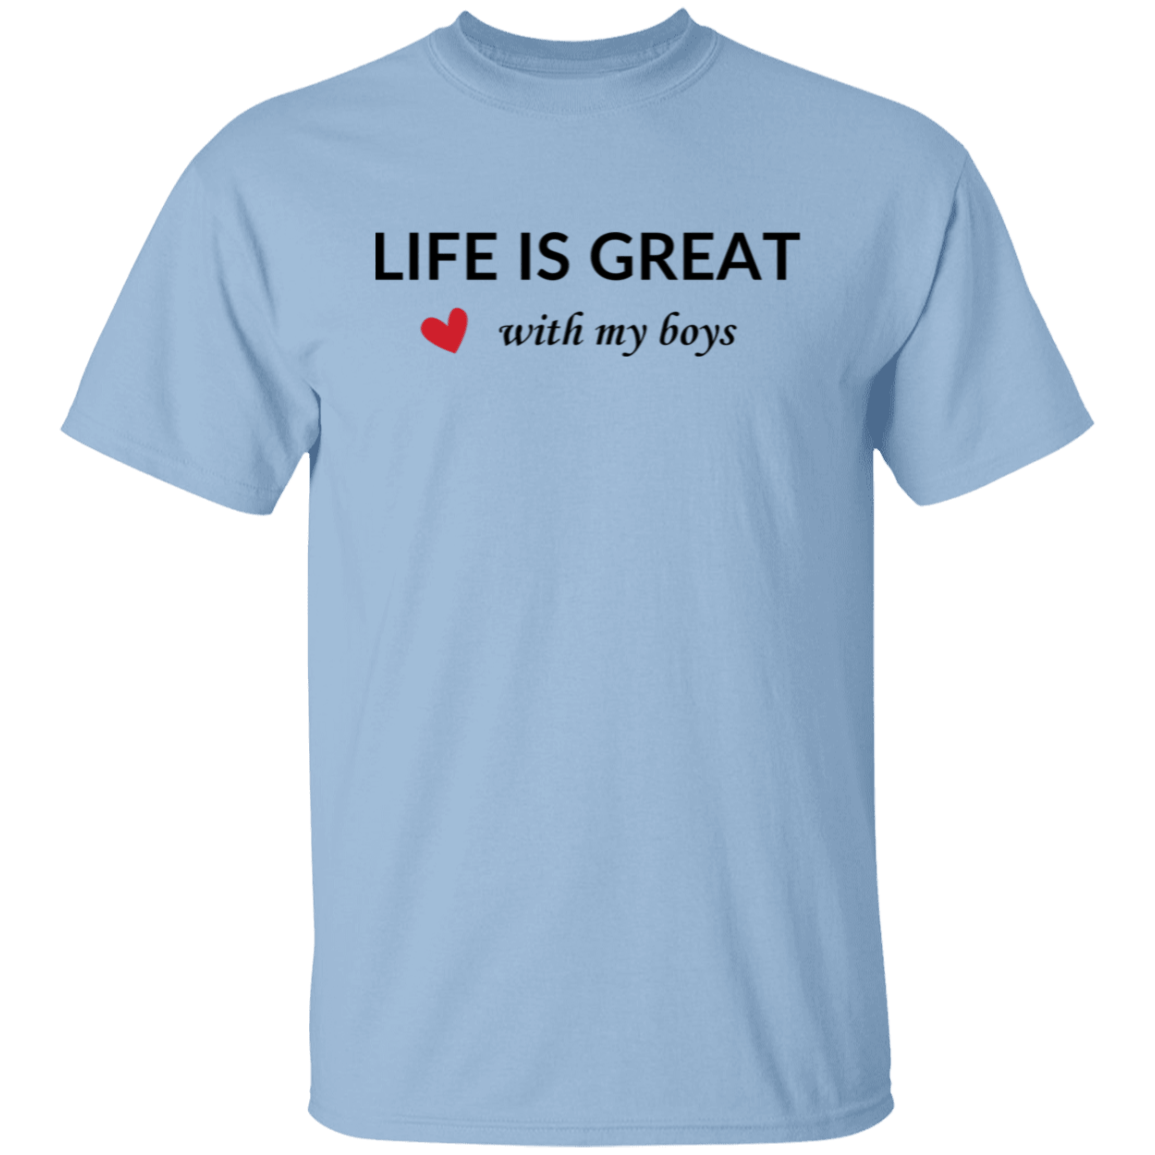 Life is Great... T-Shirt